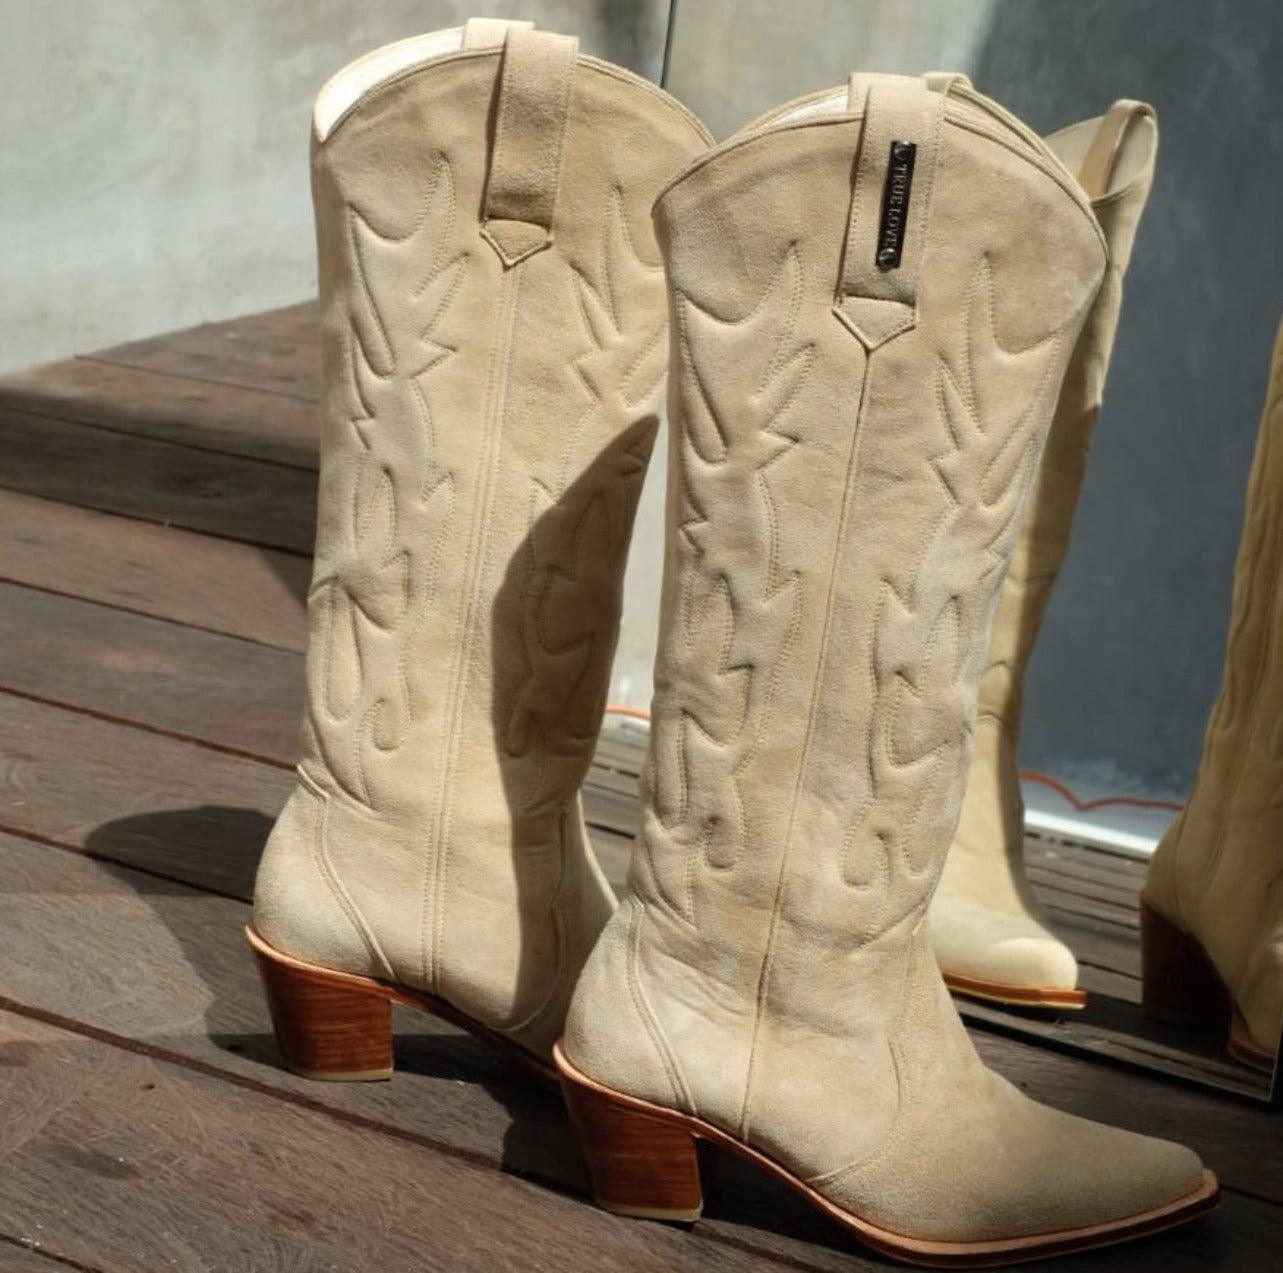 Long Suede Cowboy Boots - Expat Life Style